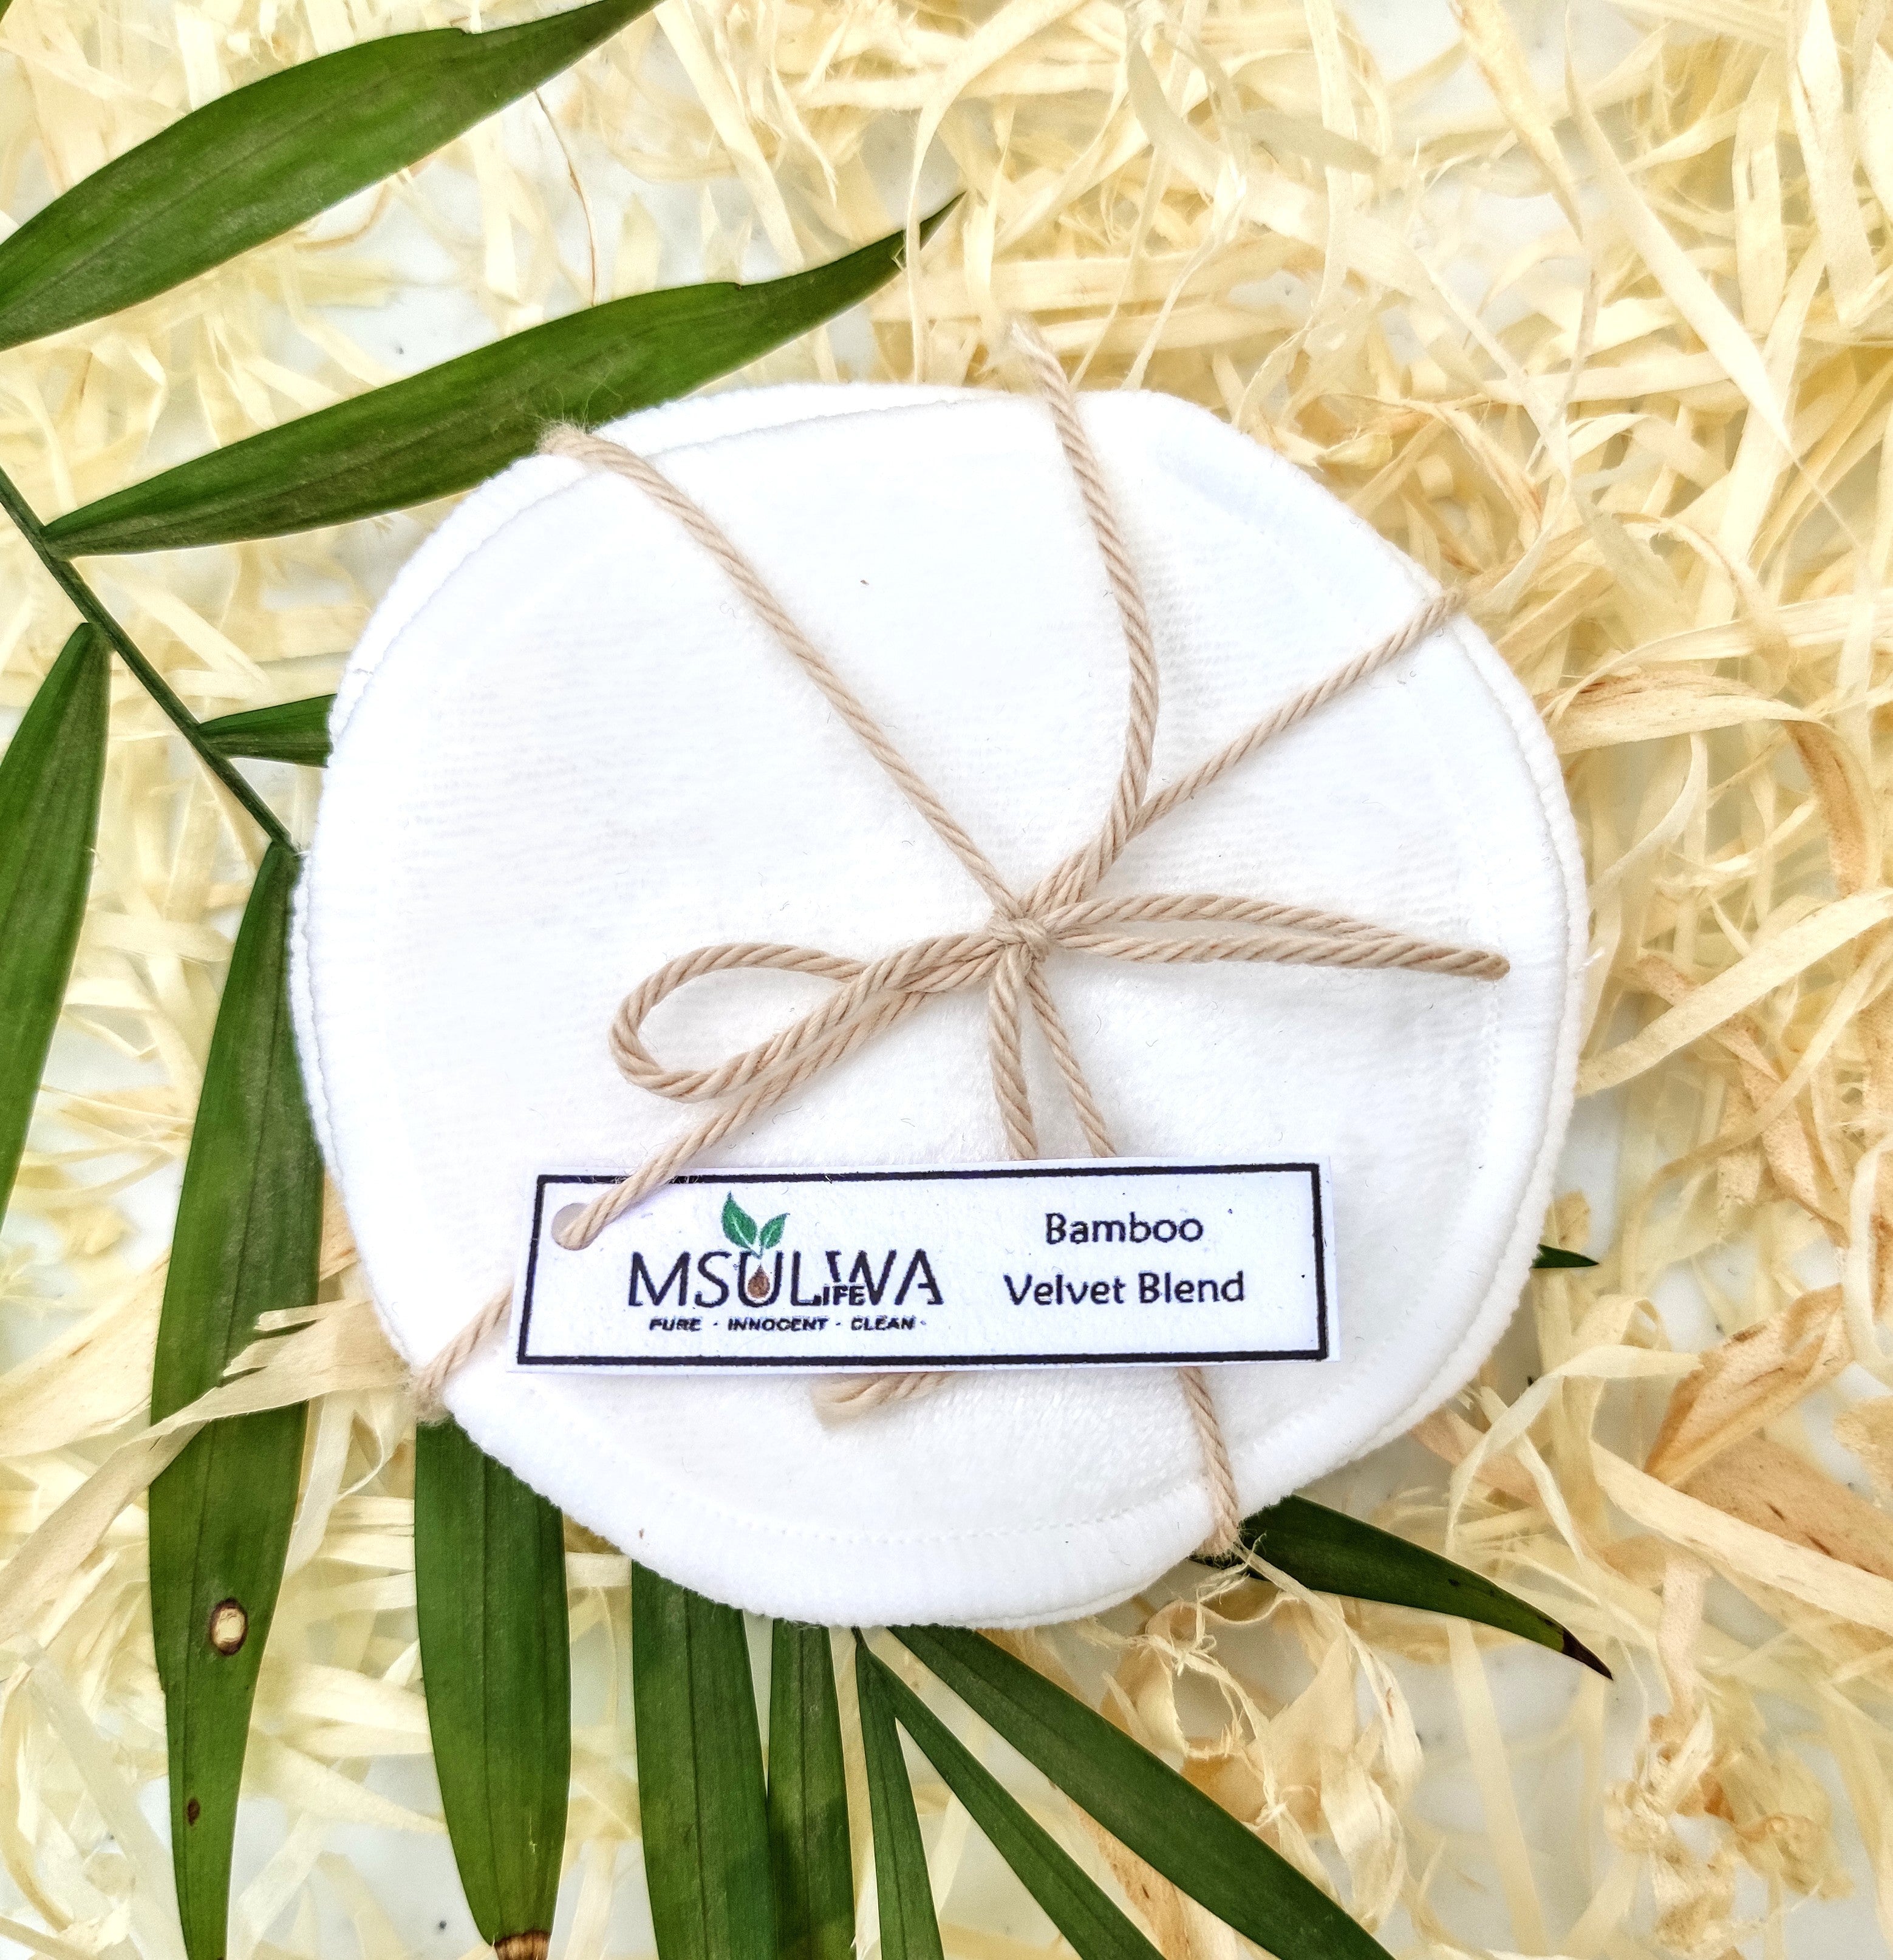 Msulwa Reusable Facial Rounds - Msulwa Onine Store. Pure, Innocent, Clean. Products that are Eco-friendly, organic, sustainable, healthy, natural, vegan, biodgradable, zero waste, eco packaging. South Africa & Worldwide